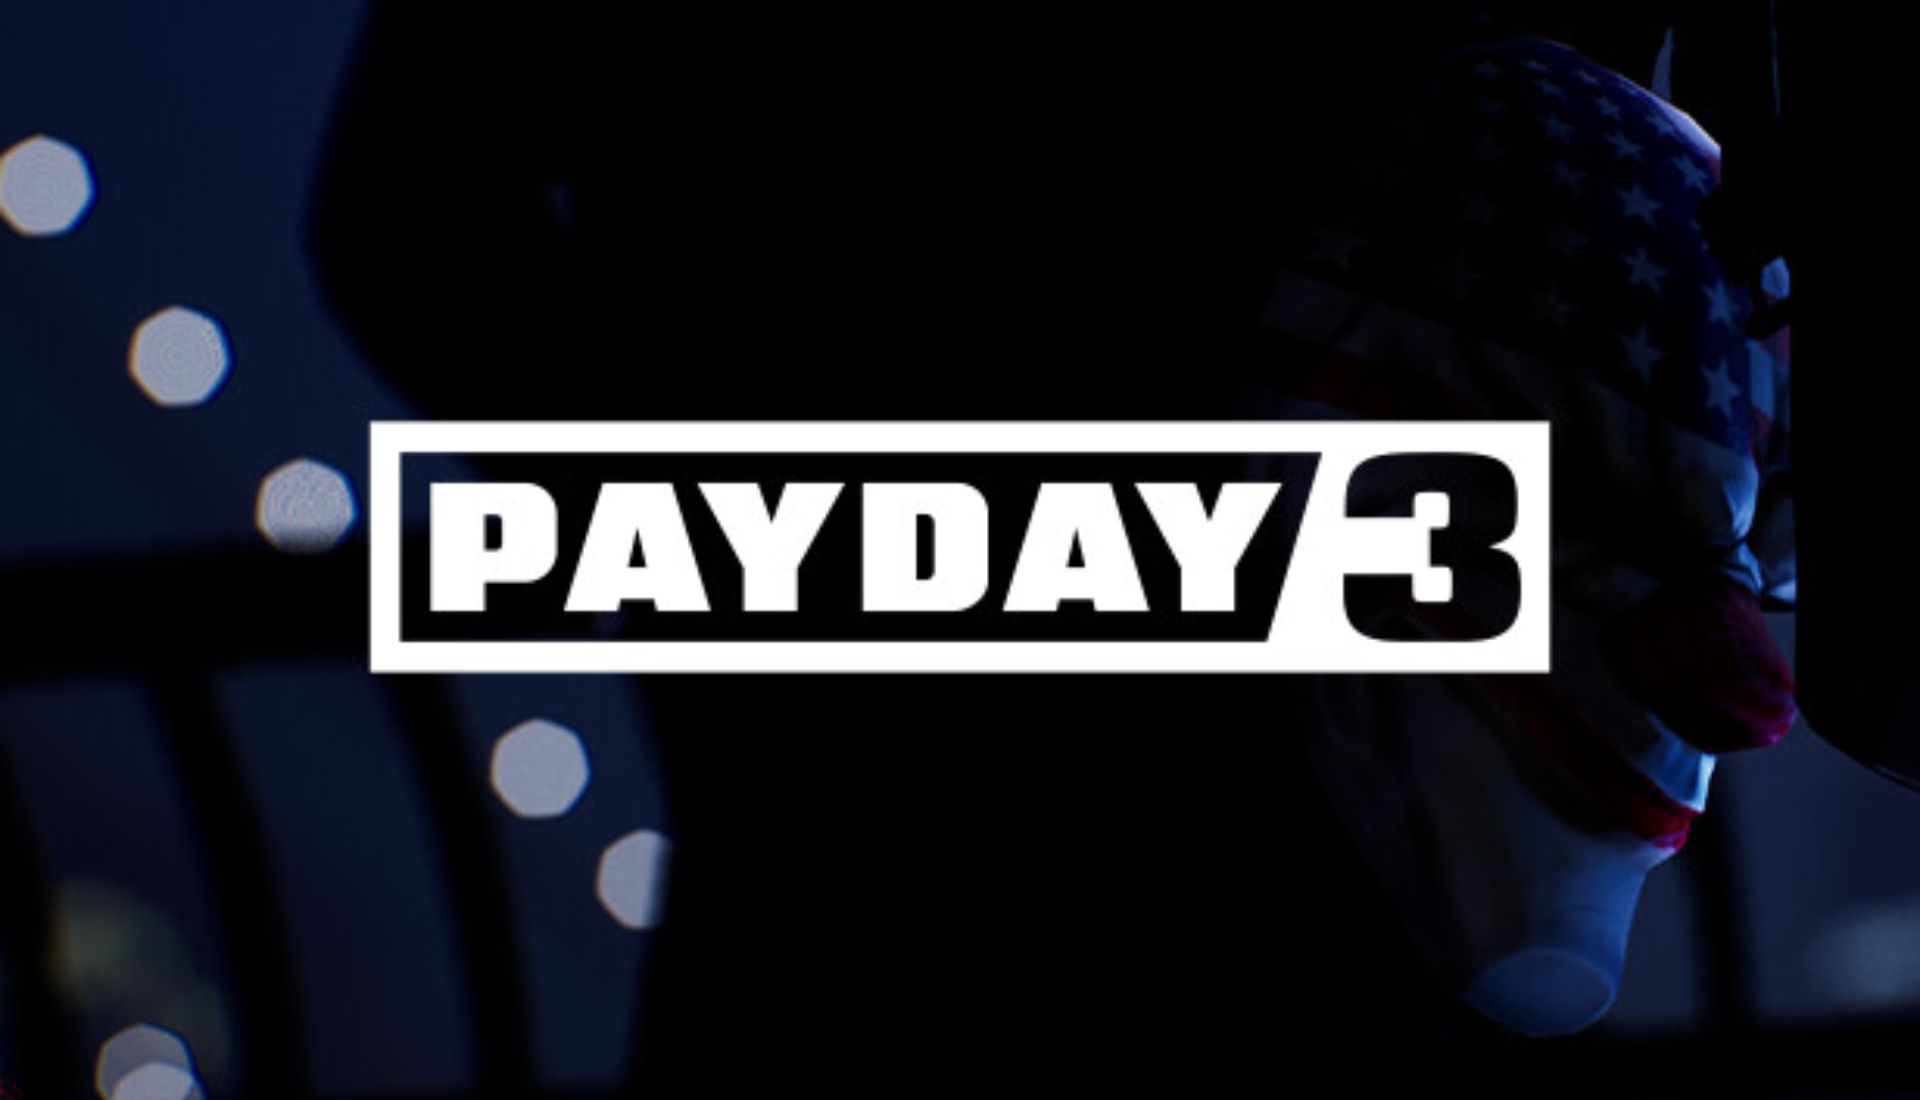 Payday 3 Xbox release date revealed, coming to Xbox Game Pass